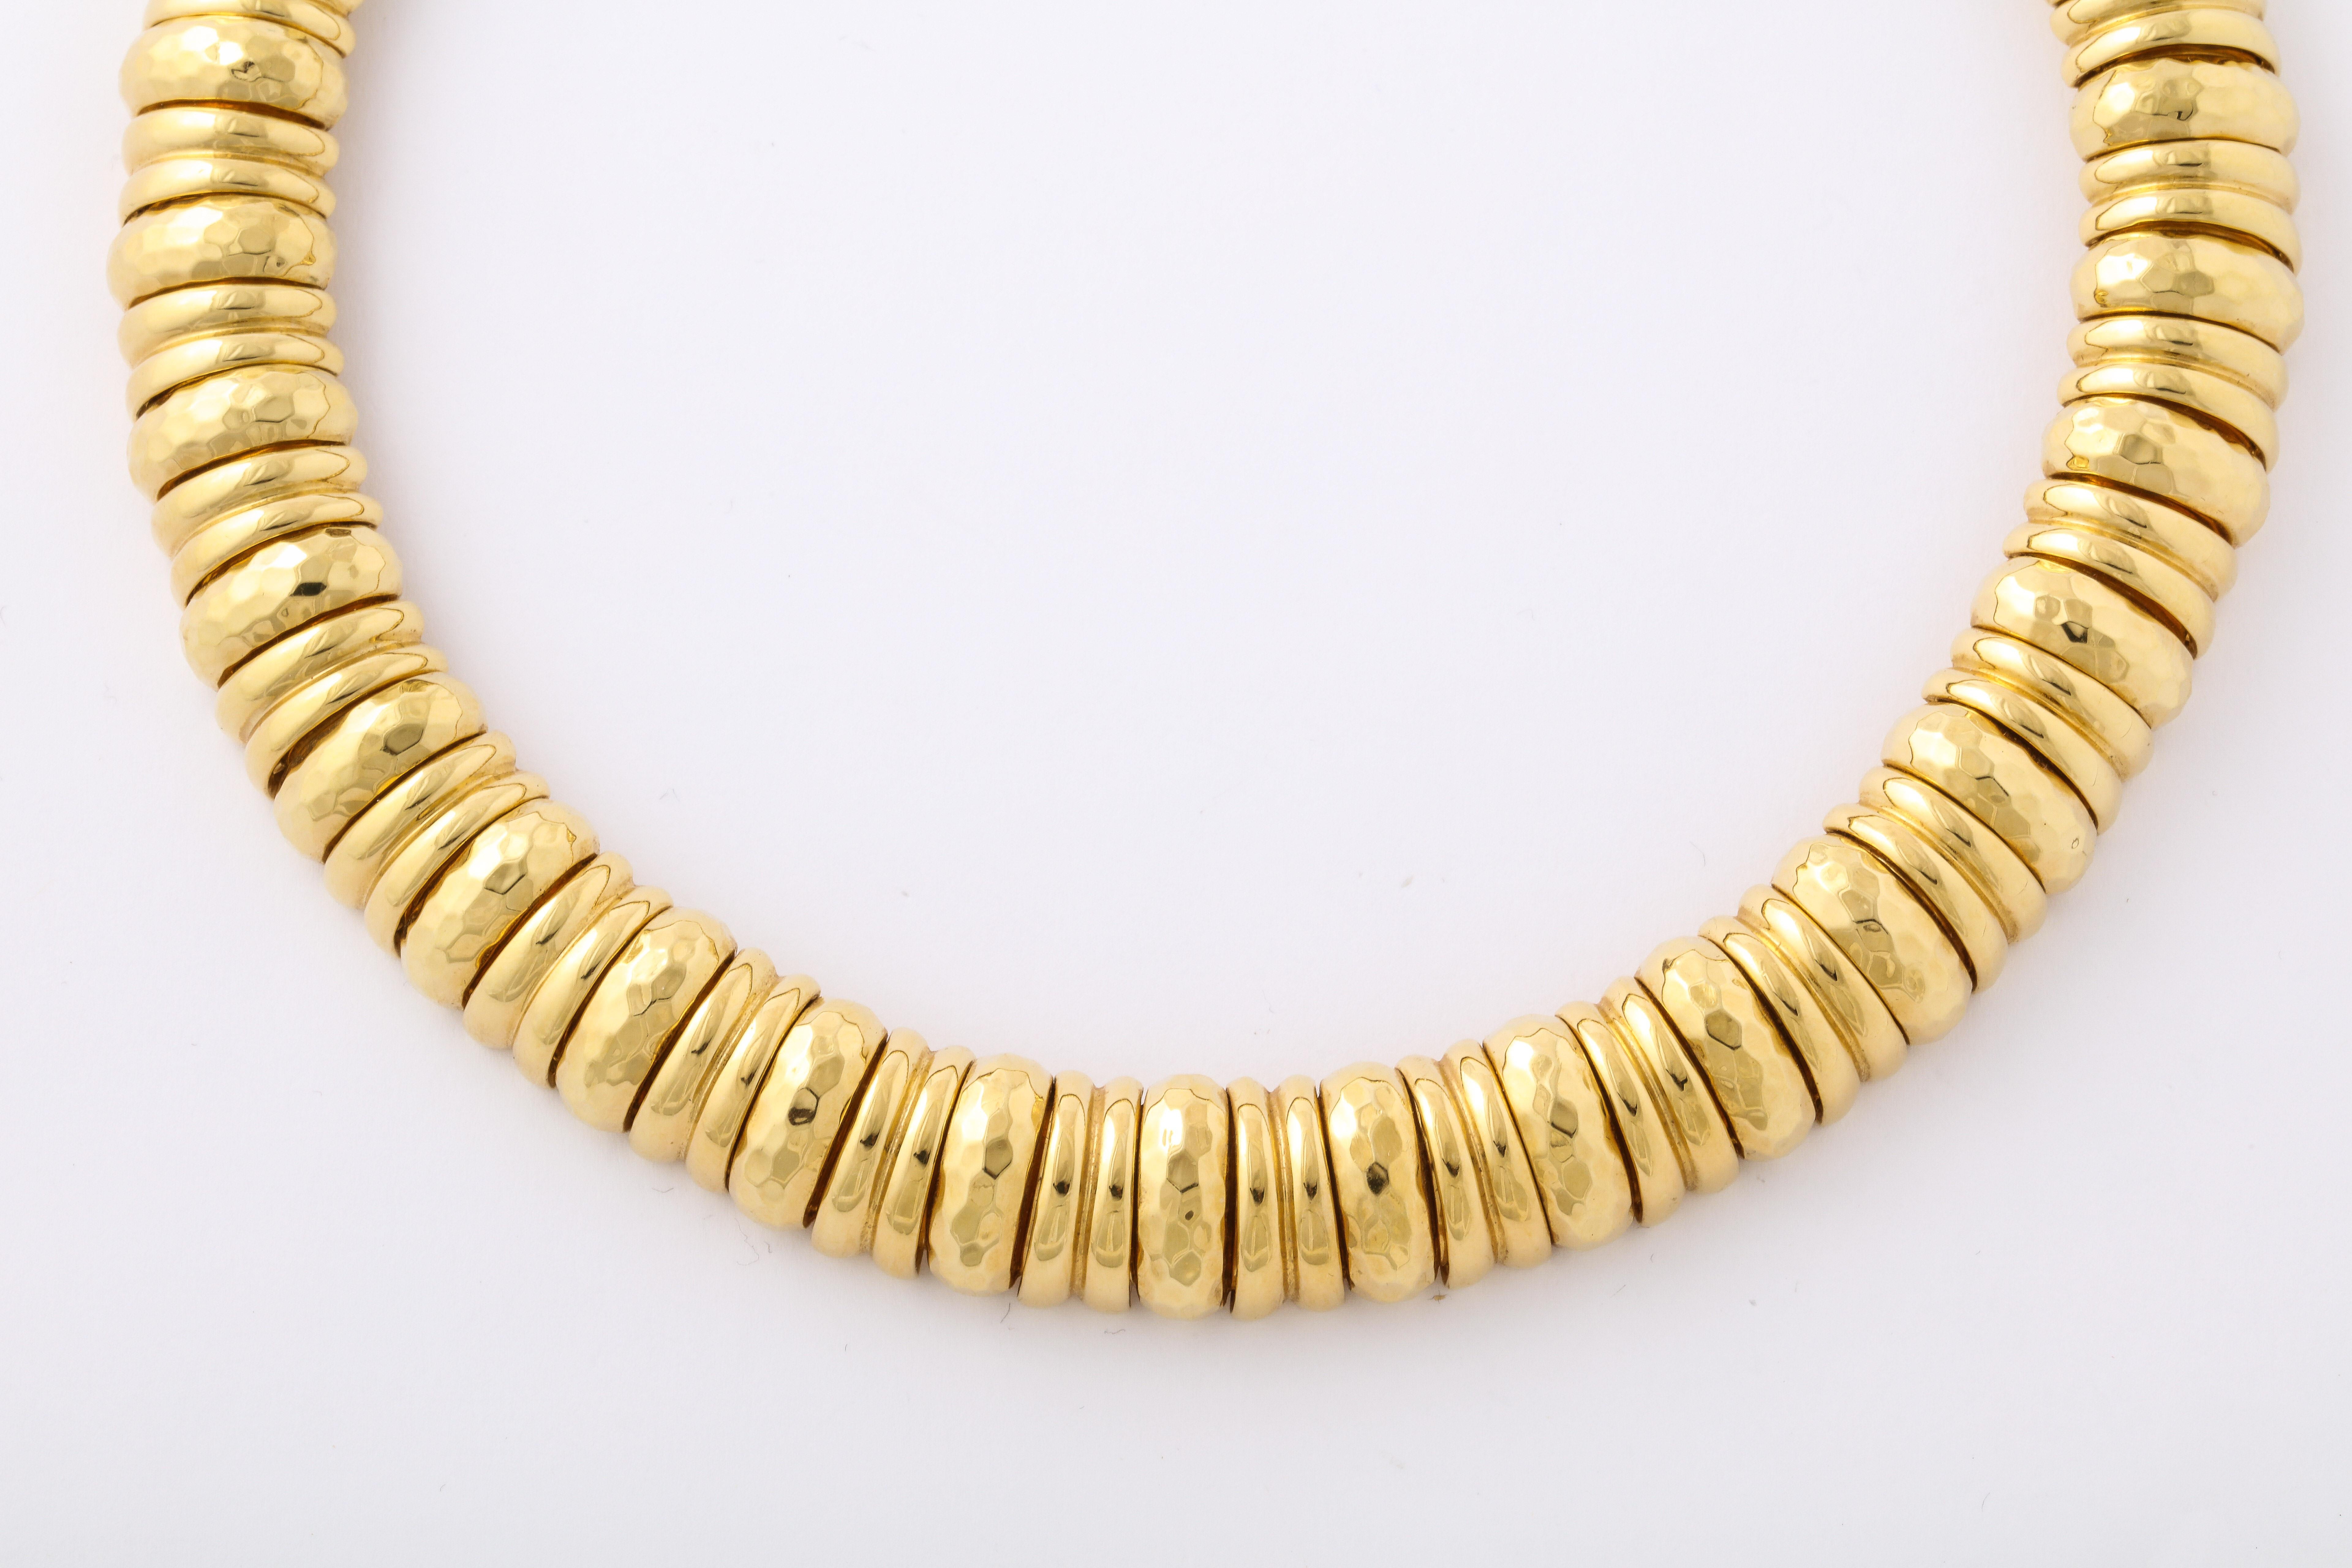 Henry Dunay Hammered Yellow Gold Collar Necklace, marked Dunay 18K C 1040 750 with Dunay hallmark. 214.6 grams, 16